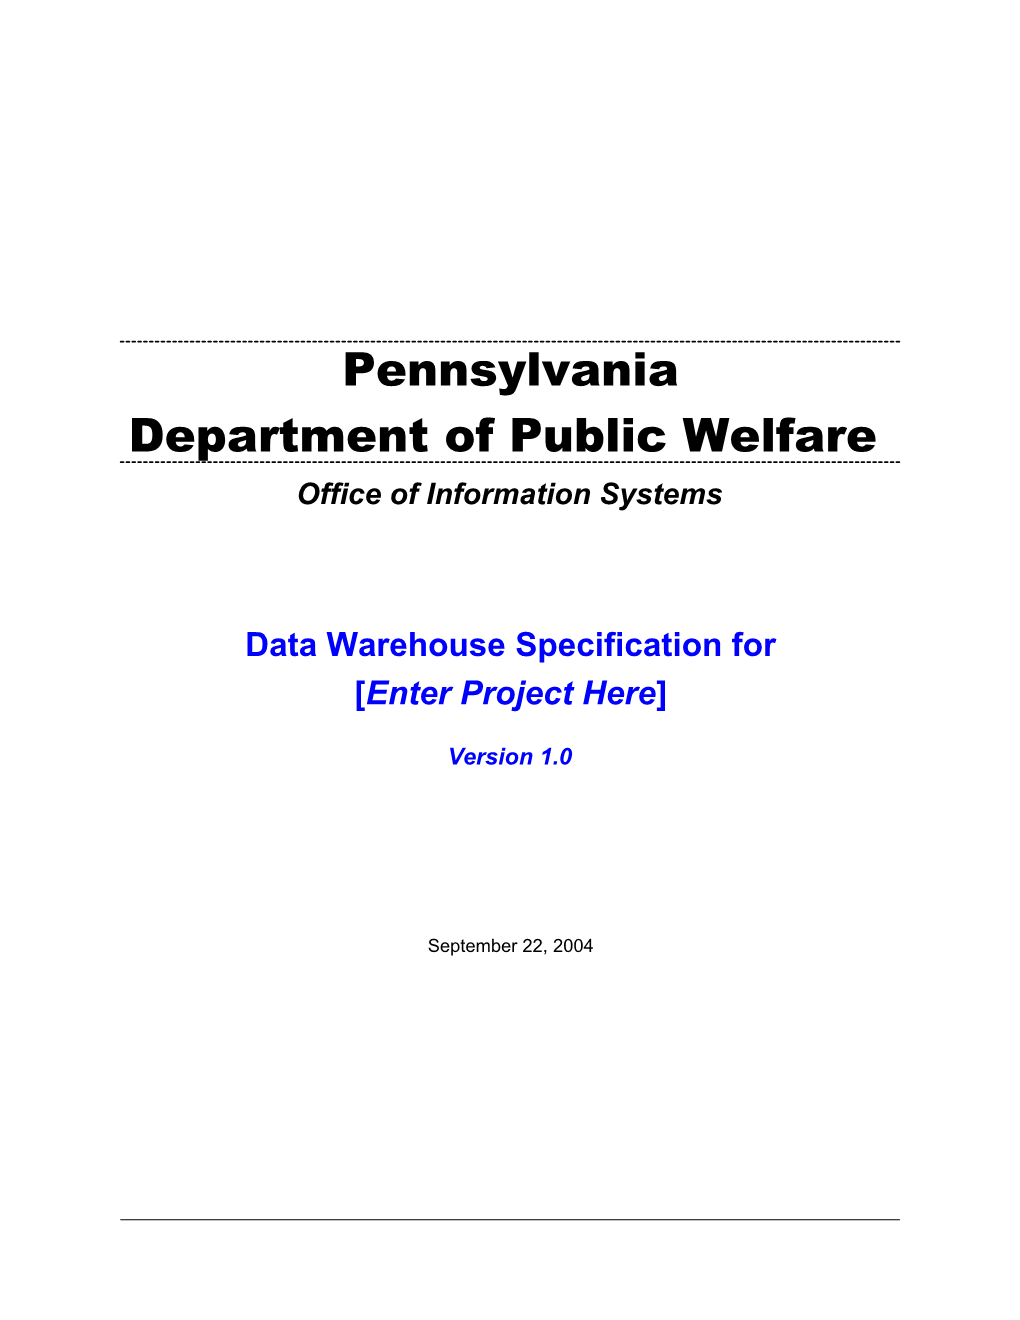 Data Warehouse Specification Template